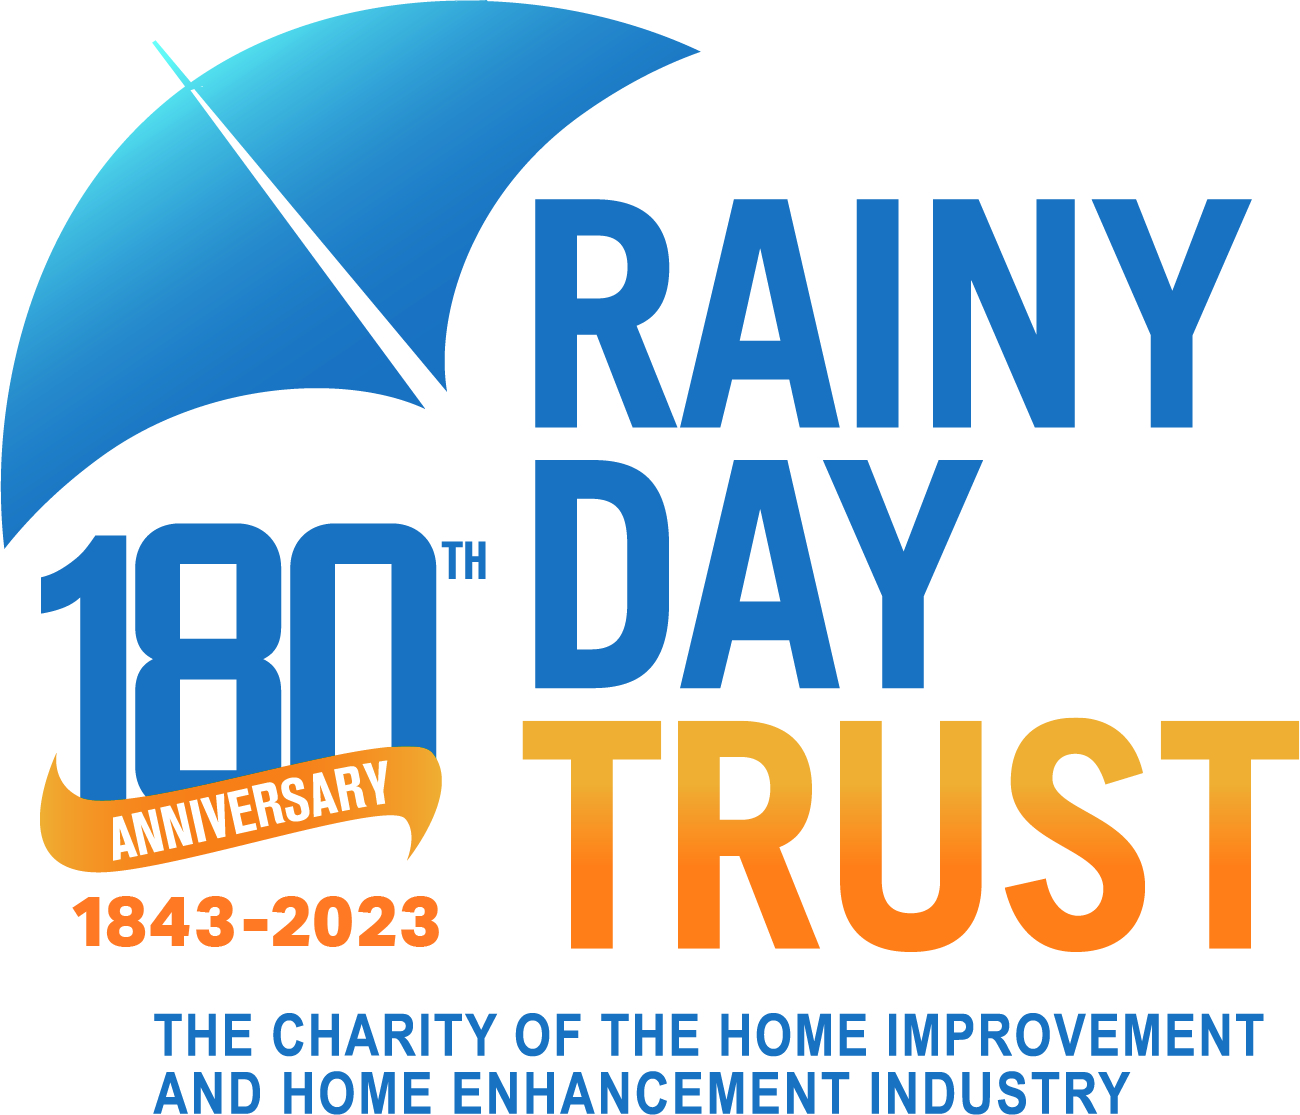 2023 will be The Rainy Day Trust’s 180th Anniversary